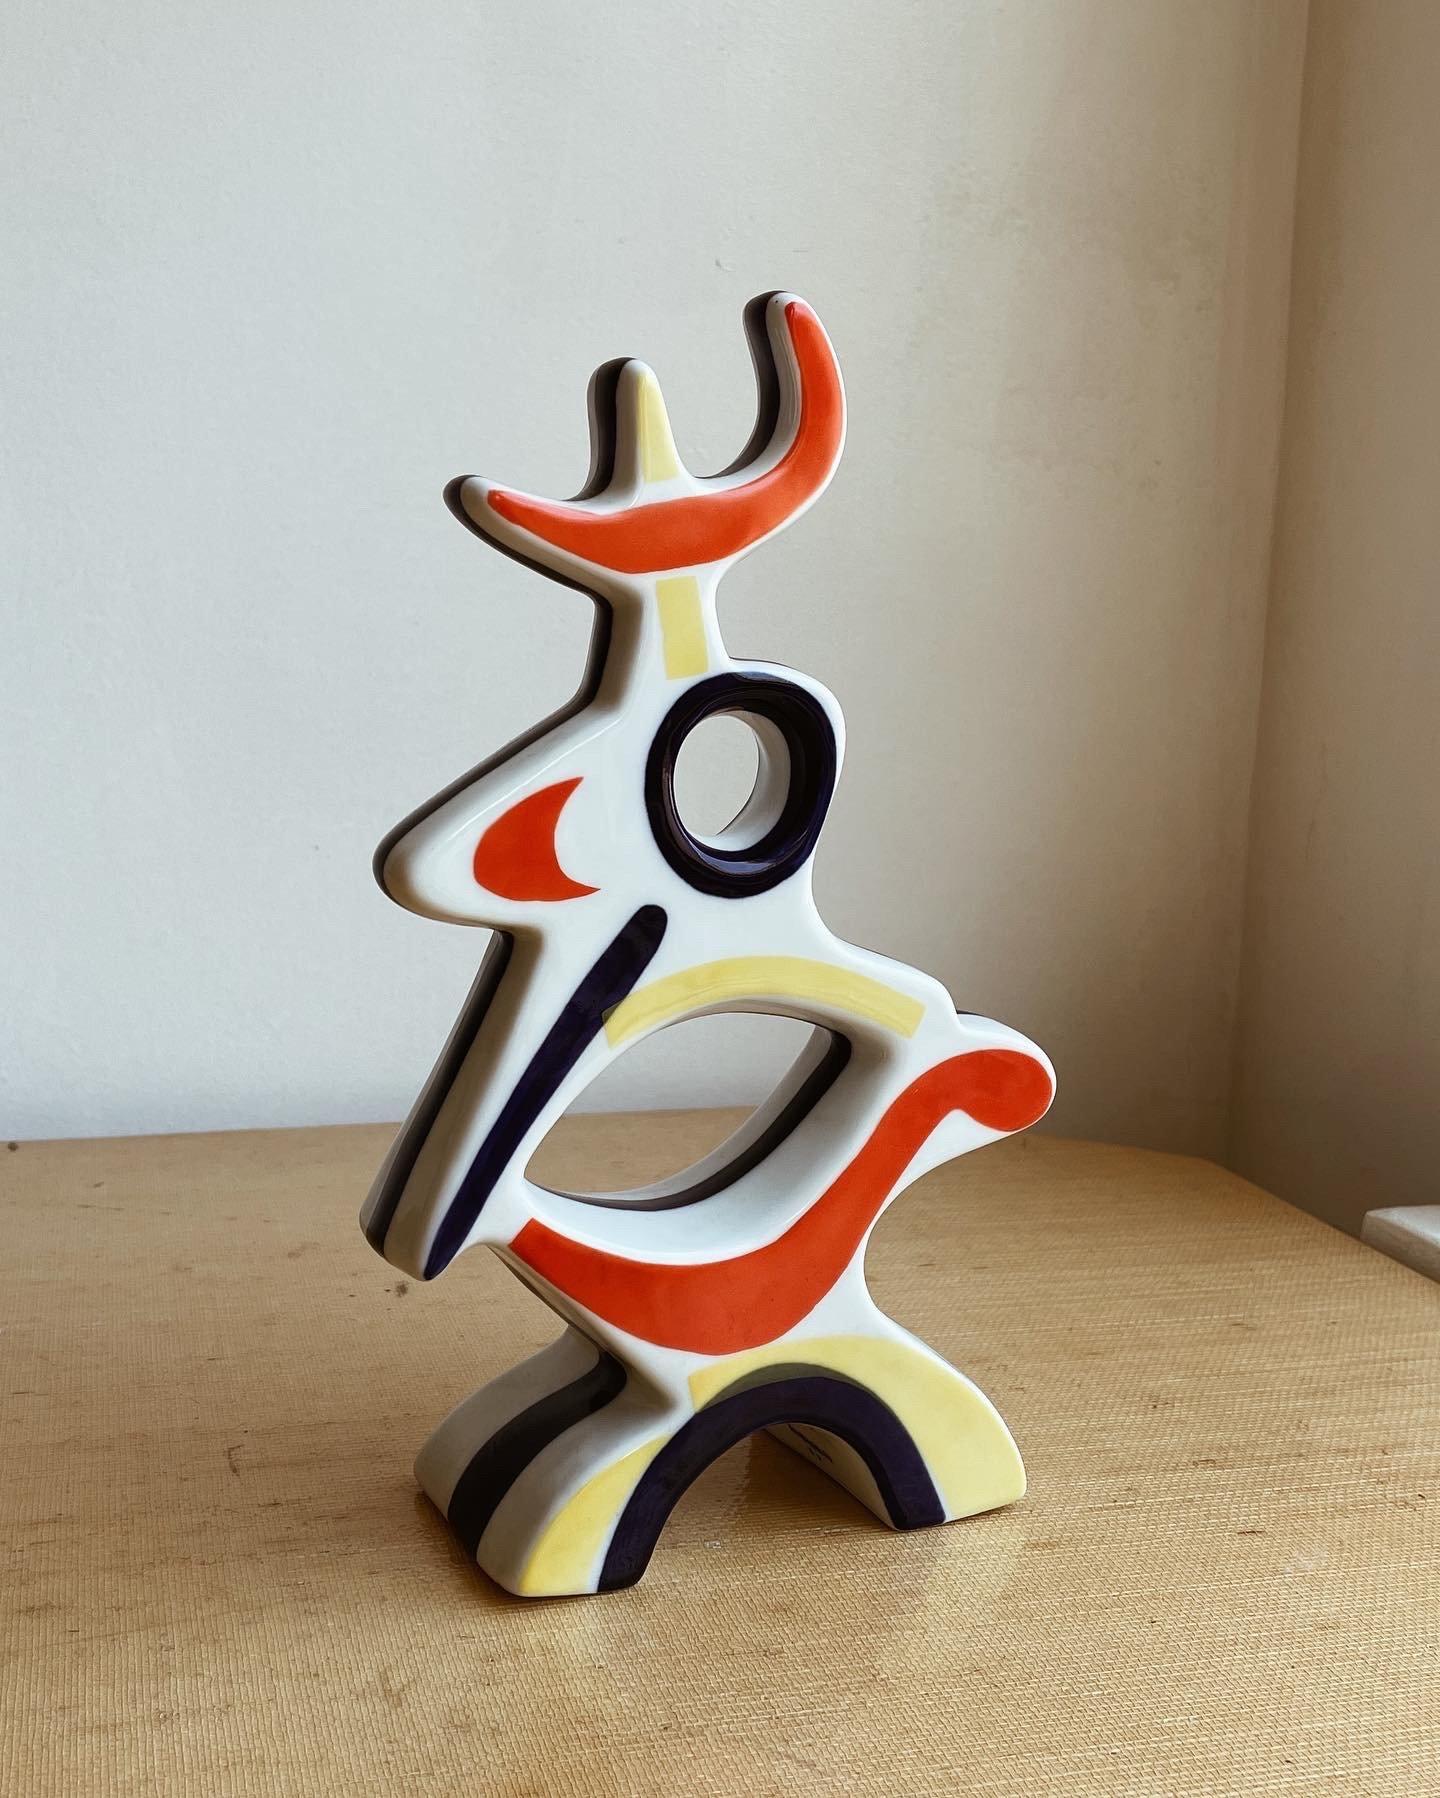 Tribute to Jean Arp. This decorative piece has been painted by hand on glazed porcelain with an intense red color.

Jean Arp Sargadelos Porcelain Vase. last quarter 20th Century signed in glaze LEMBRANO A JEAN ARP/SARGADELOS.